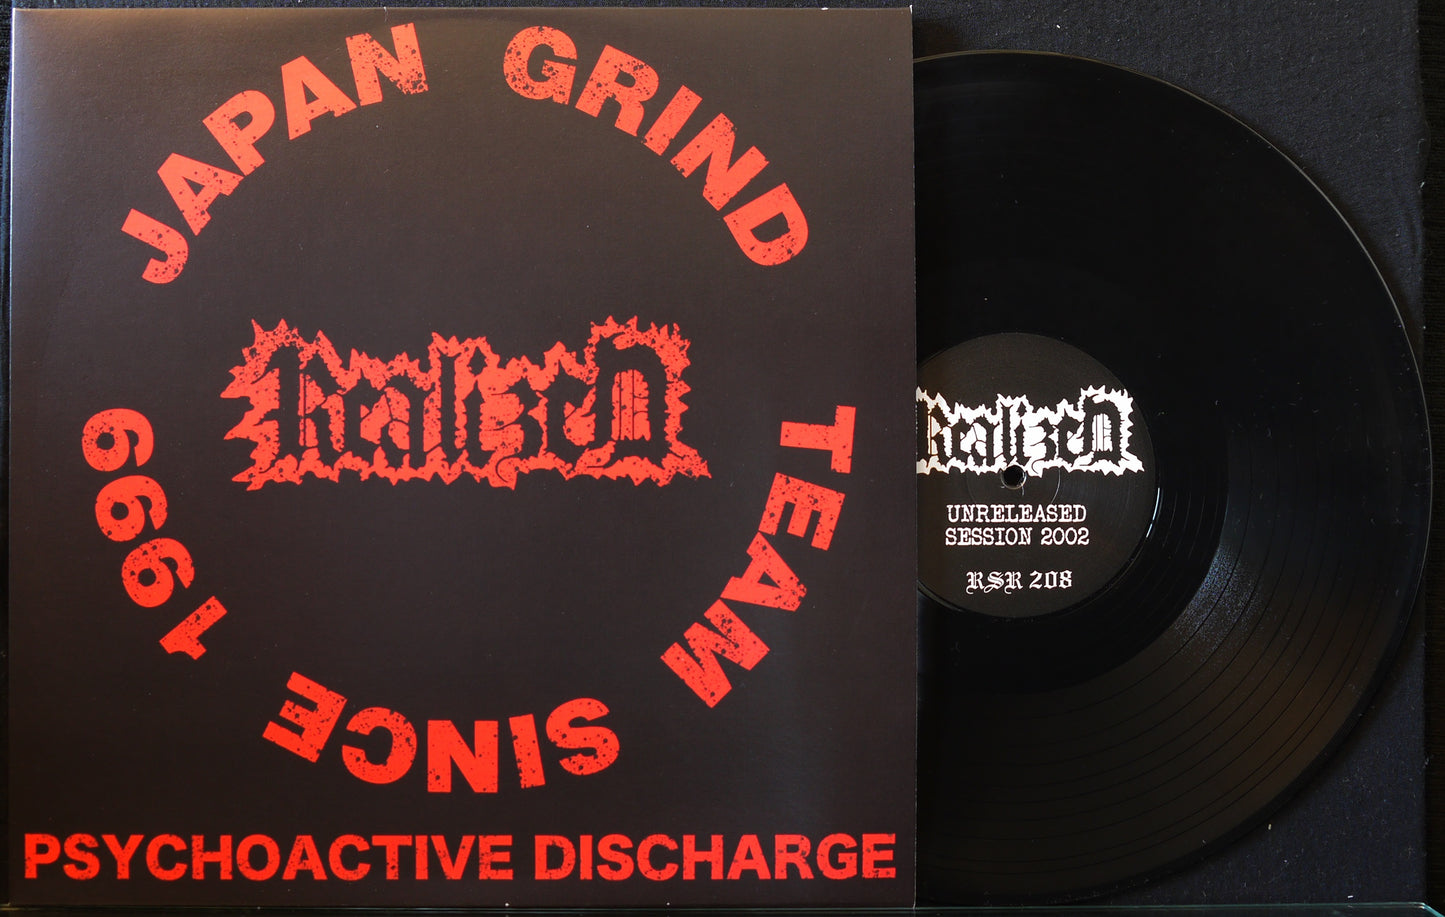 REALIZED - Psychoactive Discharge 12"